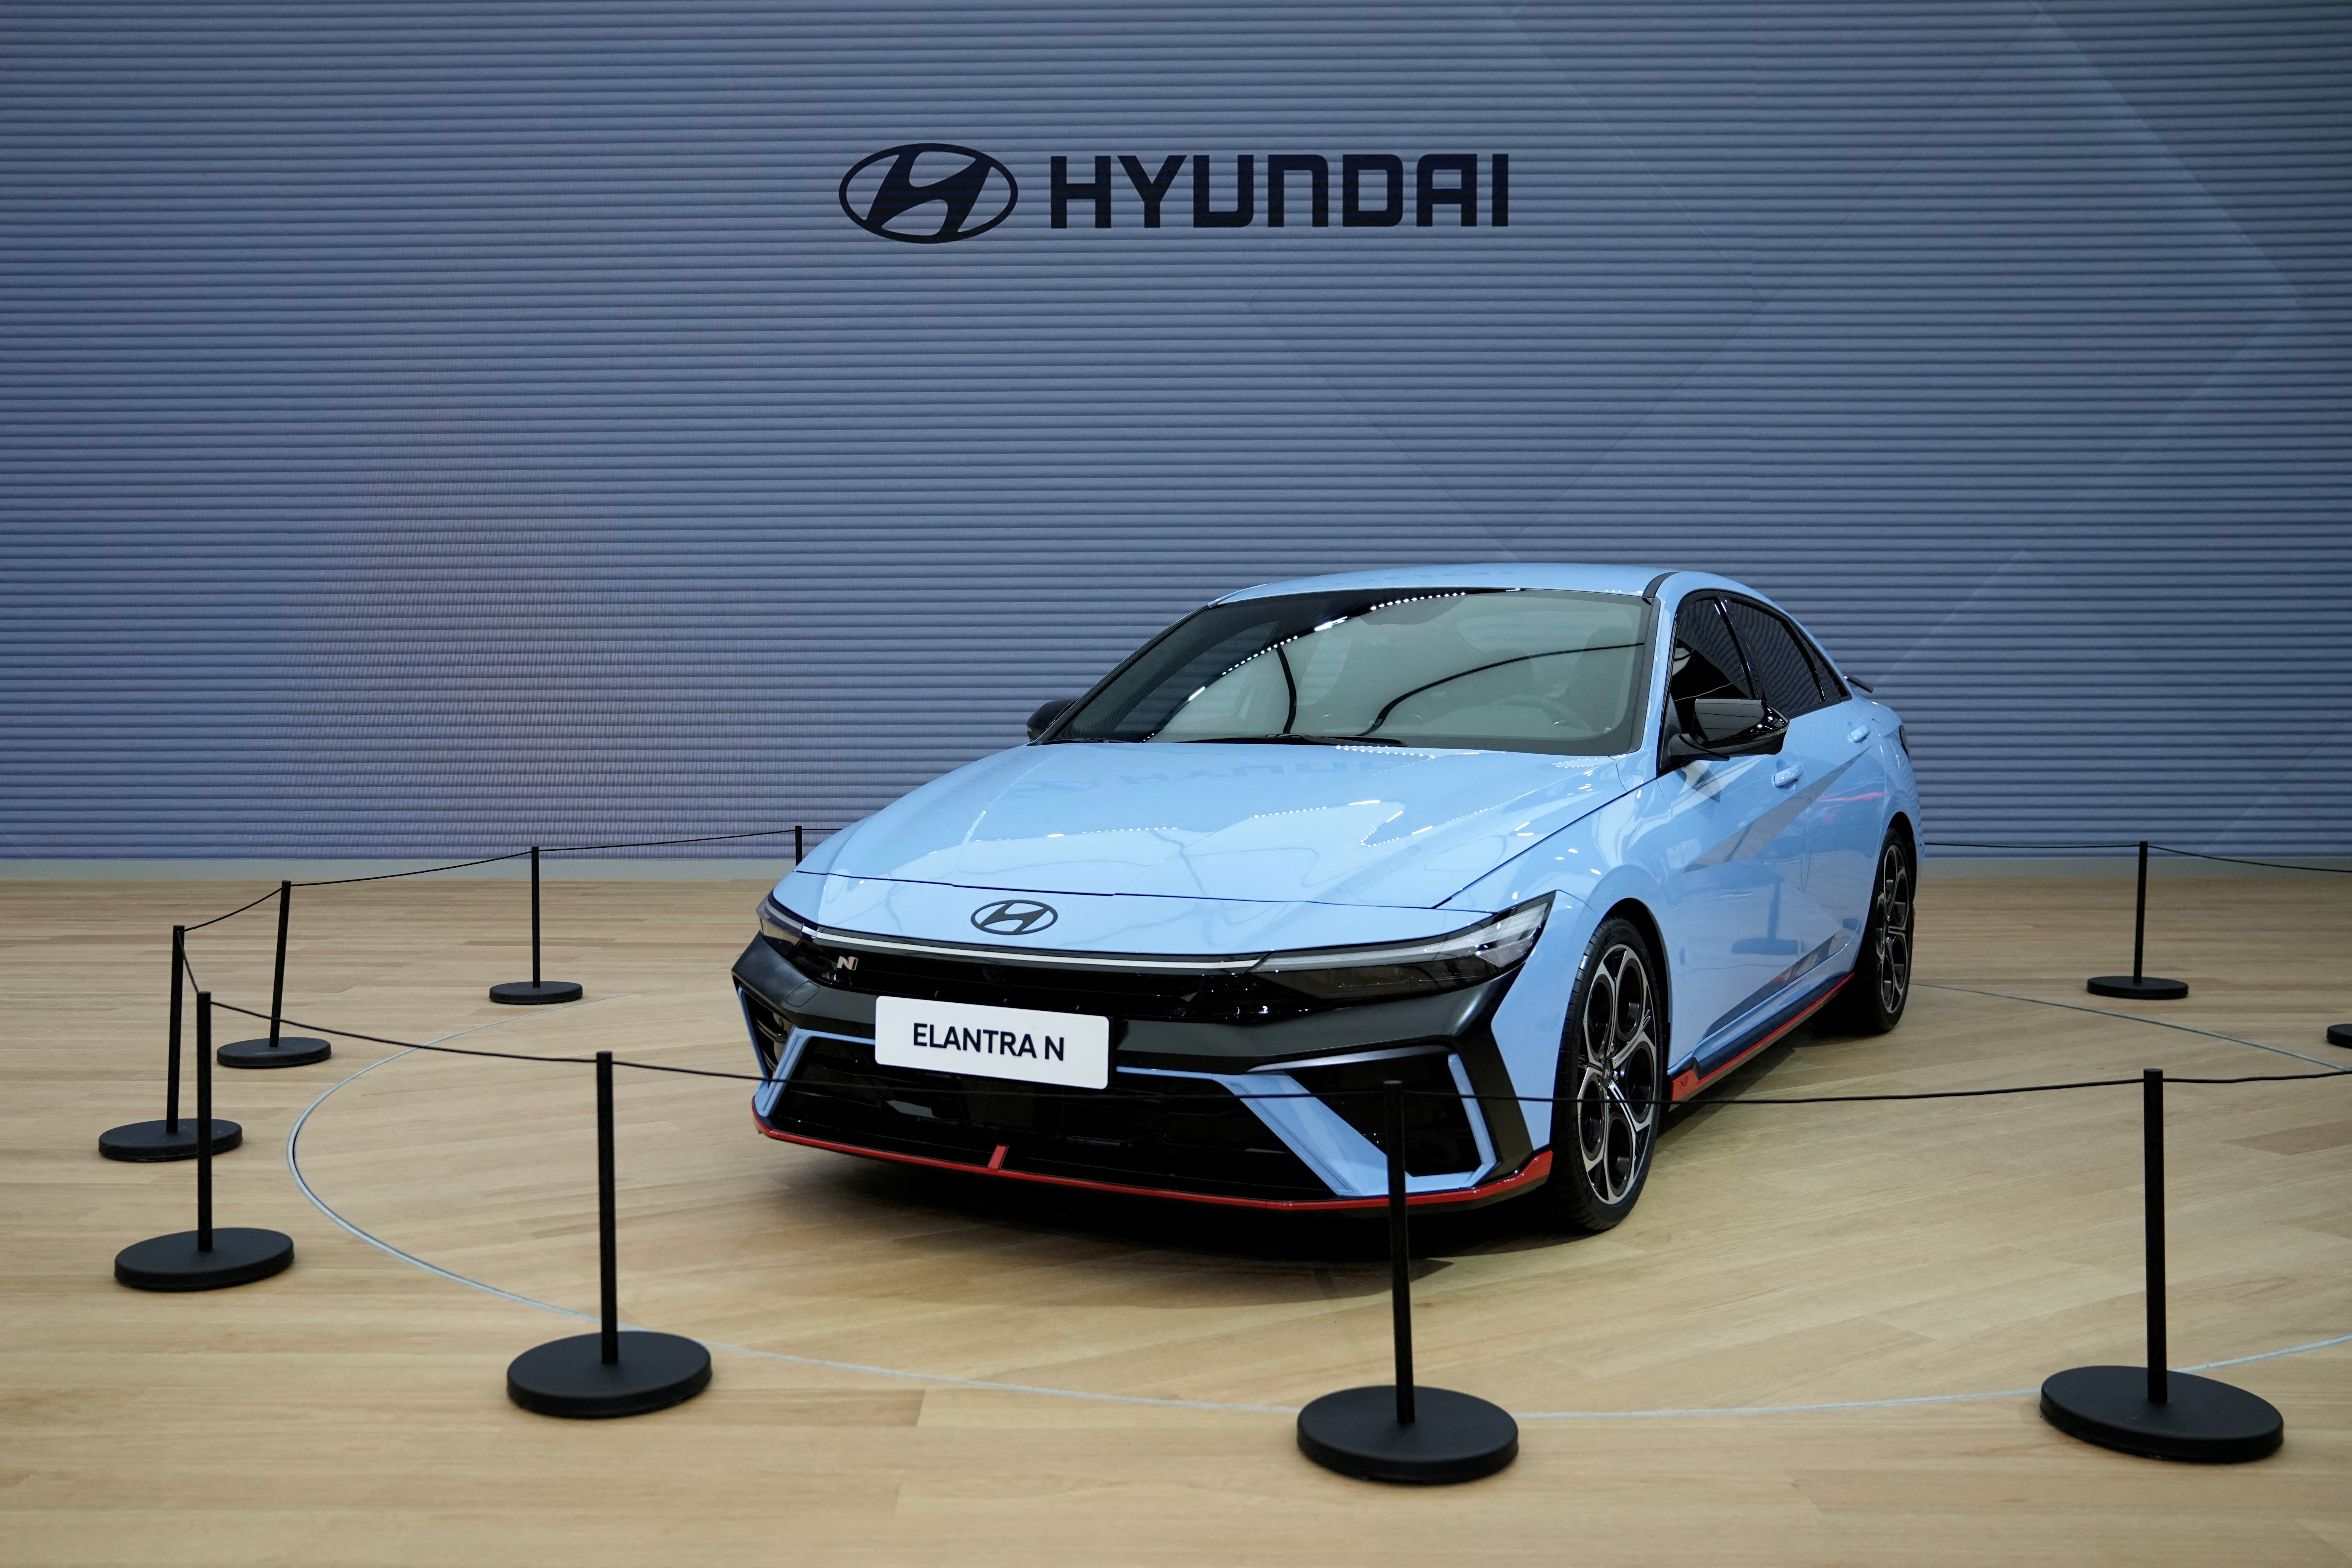 to sell Hyundai vehicles online starting in 2024